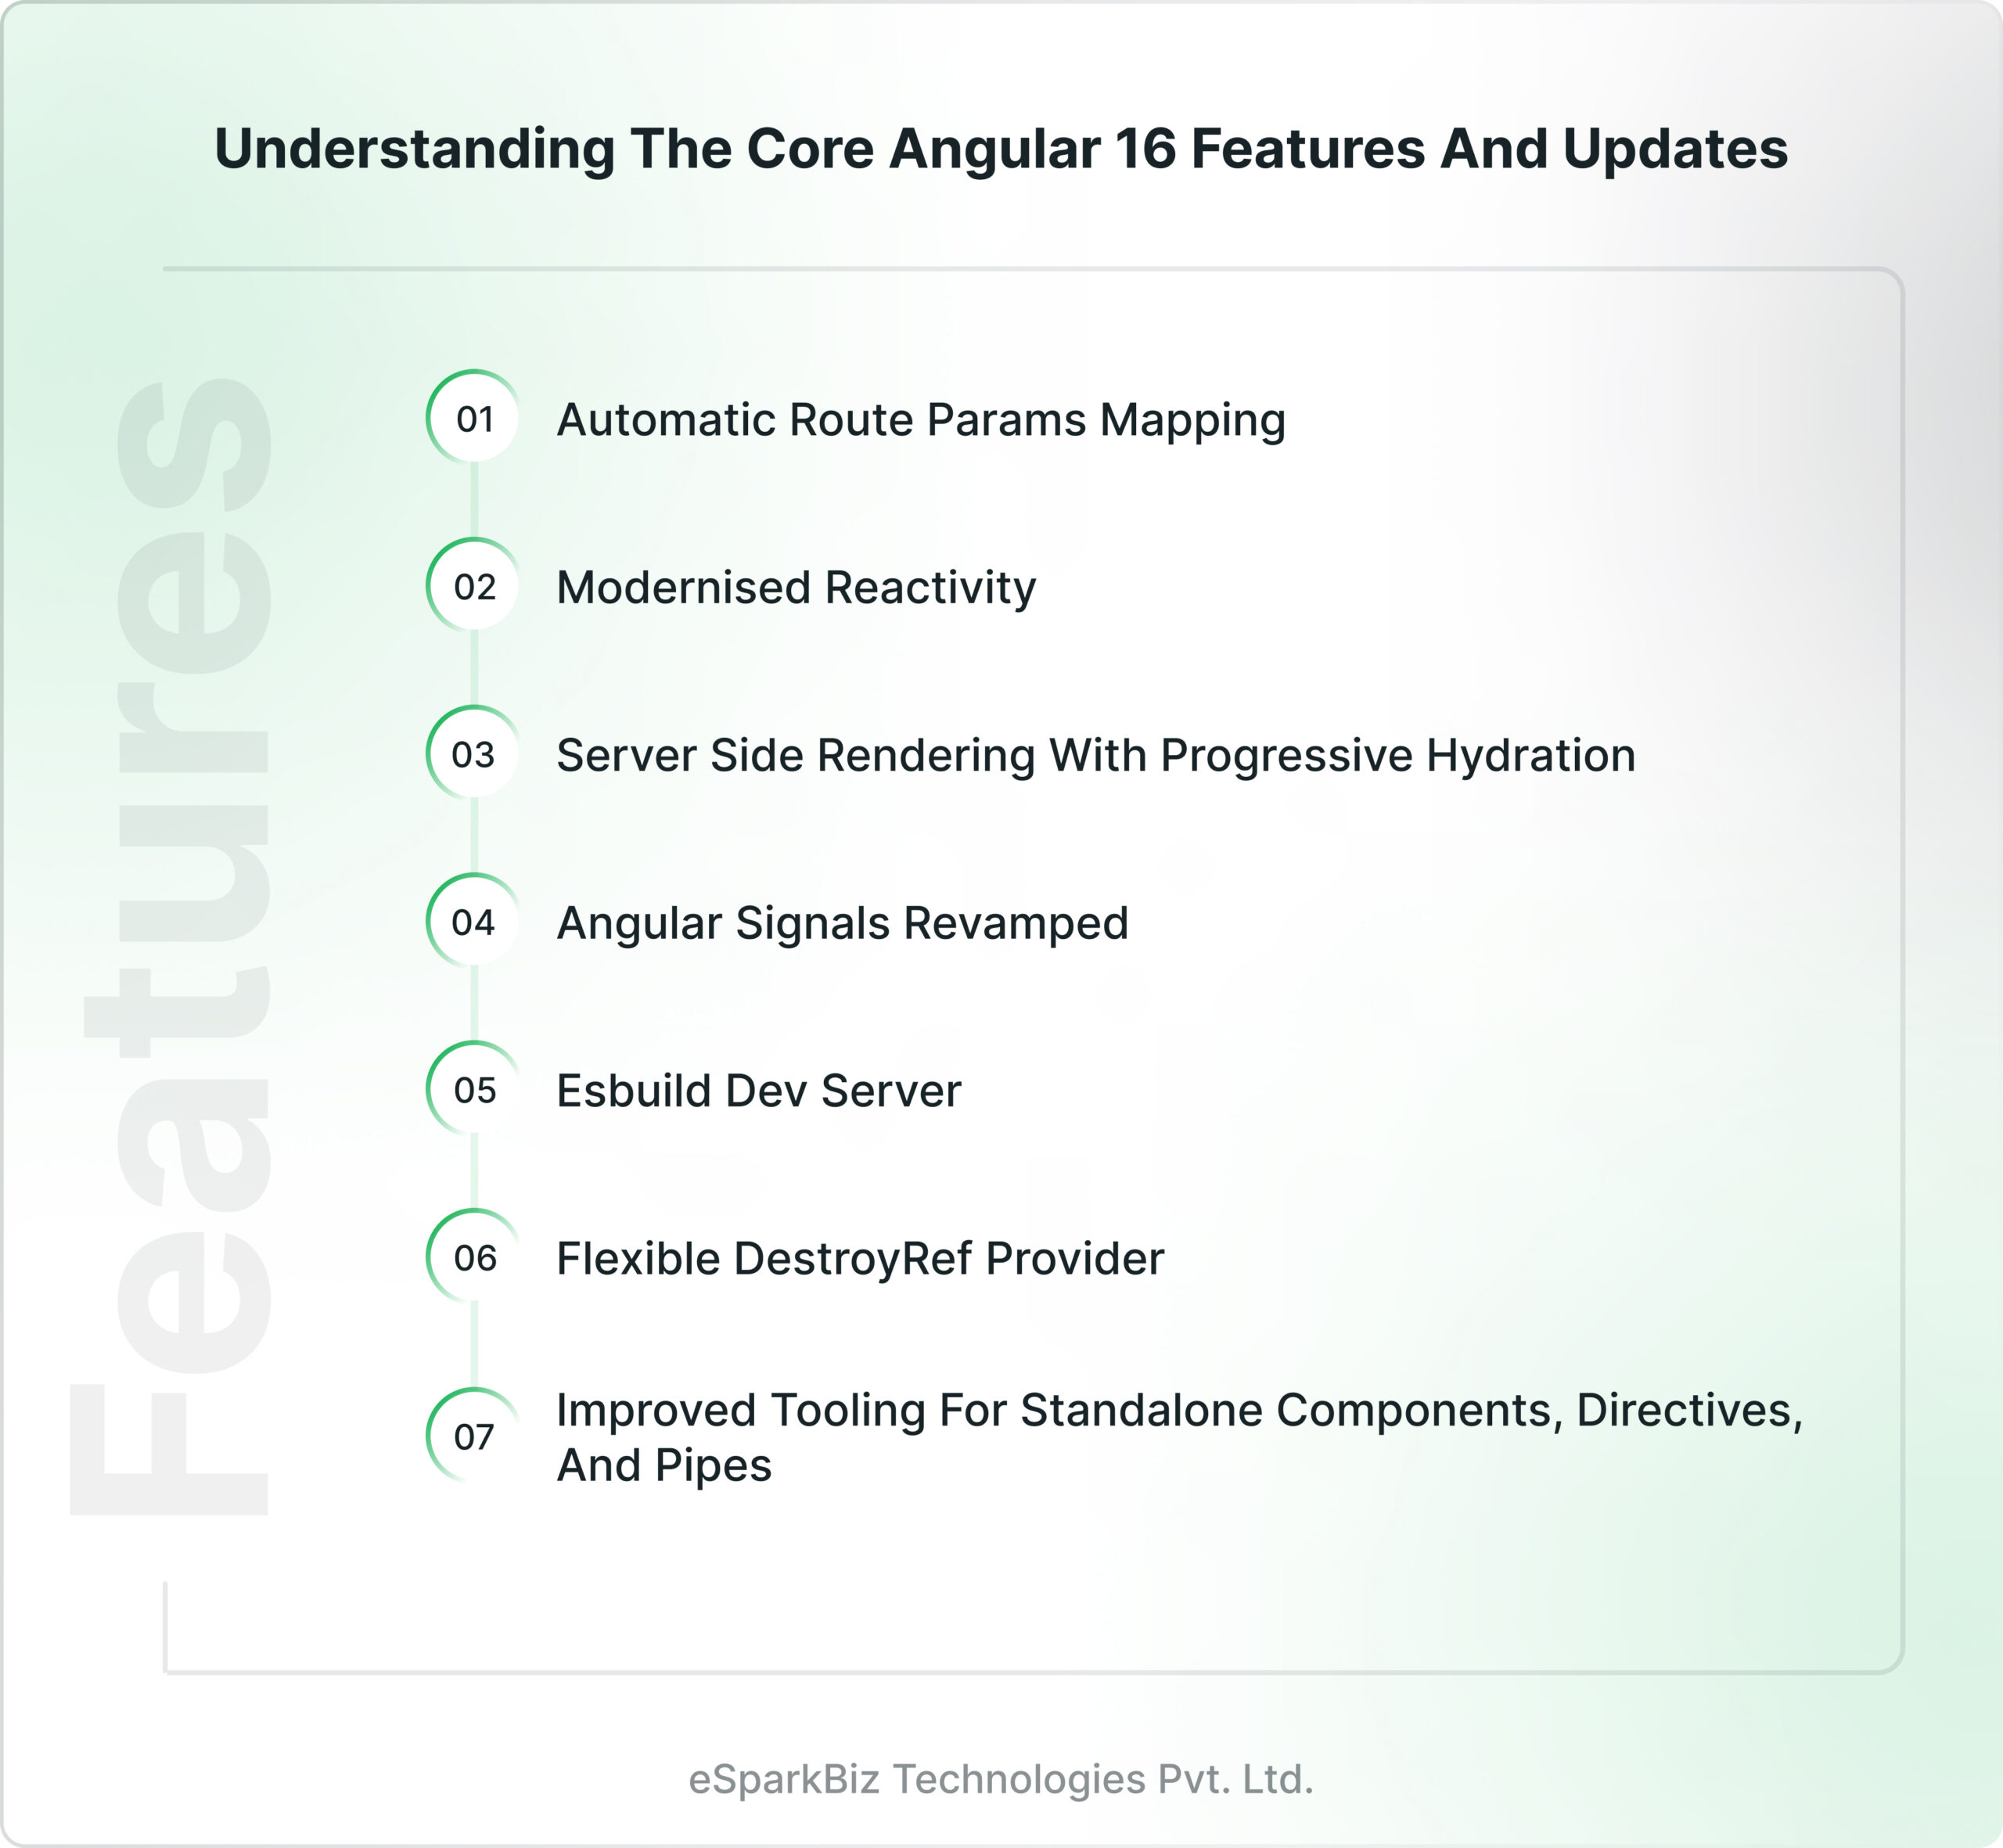 Understanding the Core Angular 16 Features and Updates